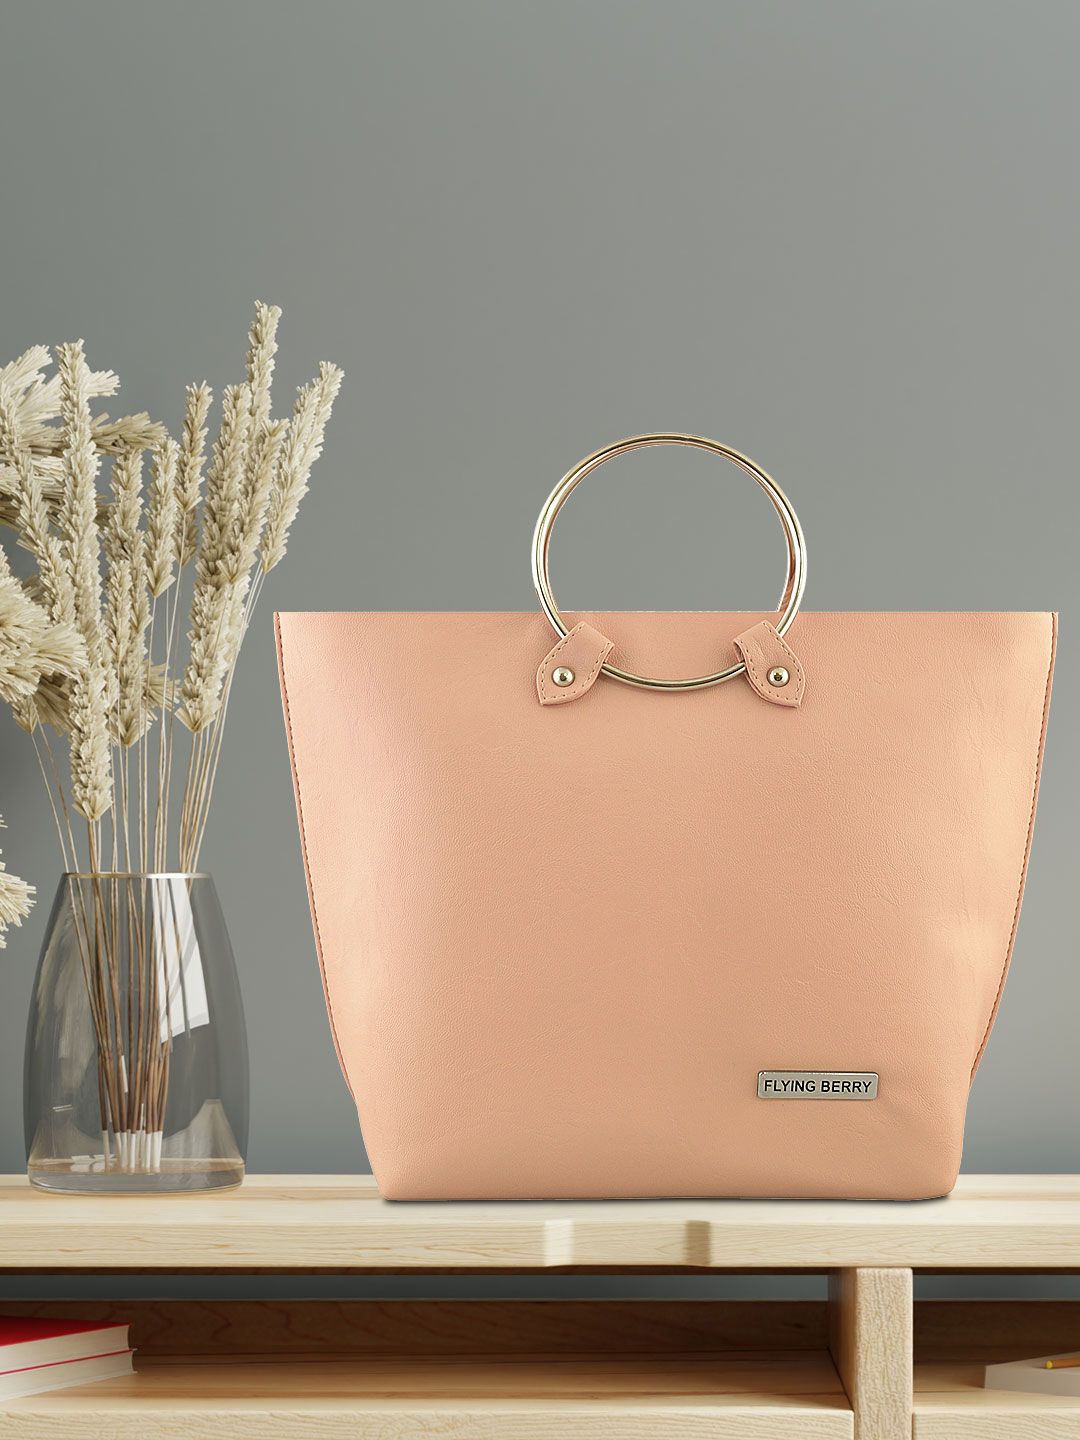 FLYING BERRY Peach-Coloured Solid Handheld Bag Price in India